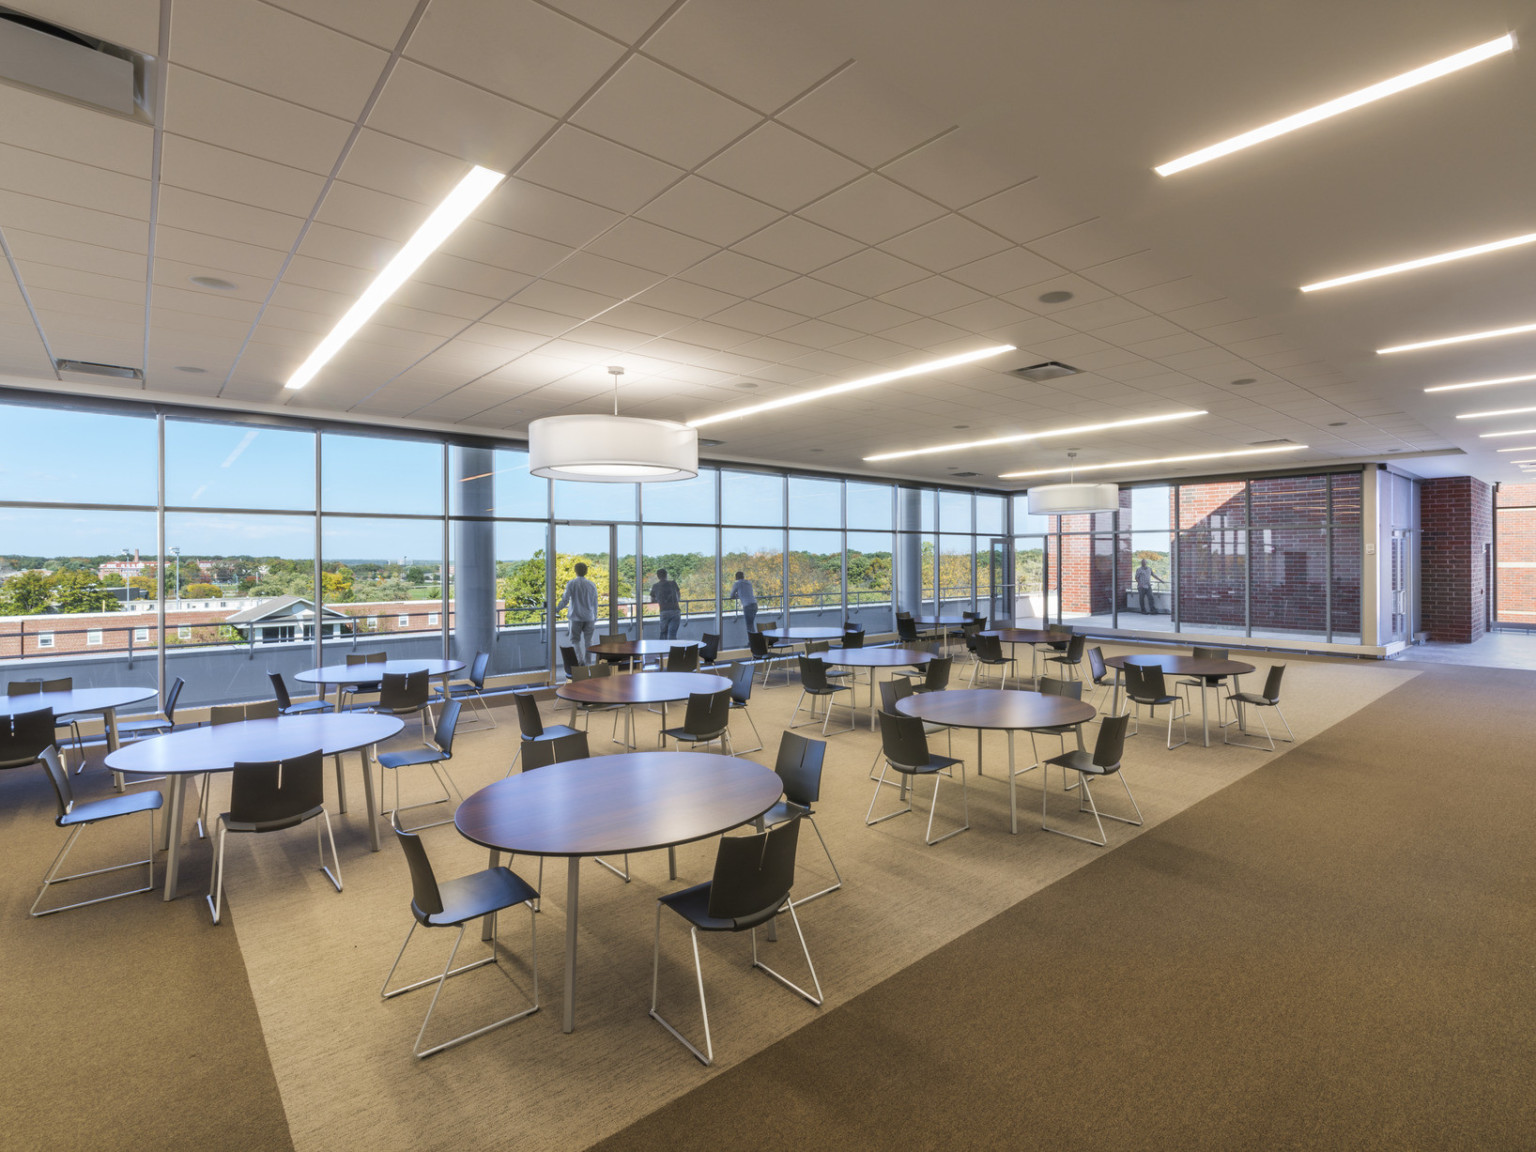 Interior flexible seating area with round tables. Floor to ceiling windows look to exterior balcony walkway overlooking campus